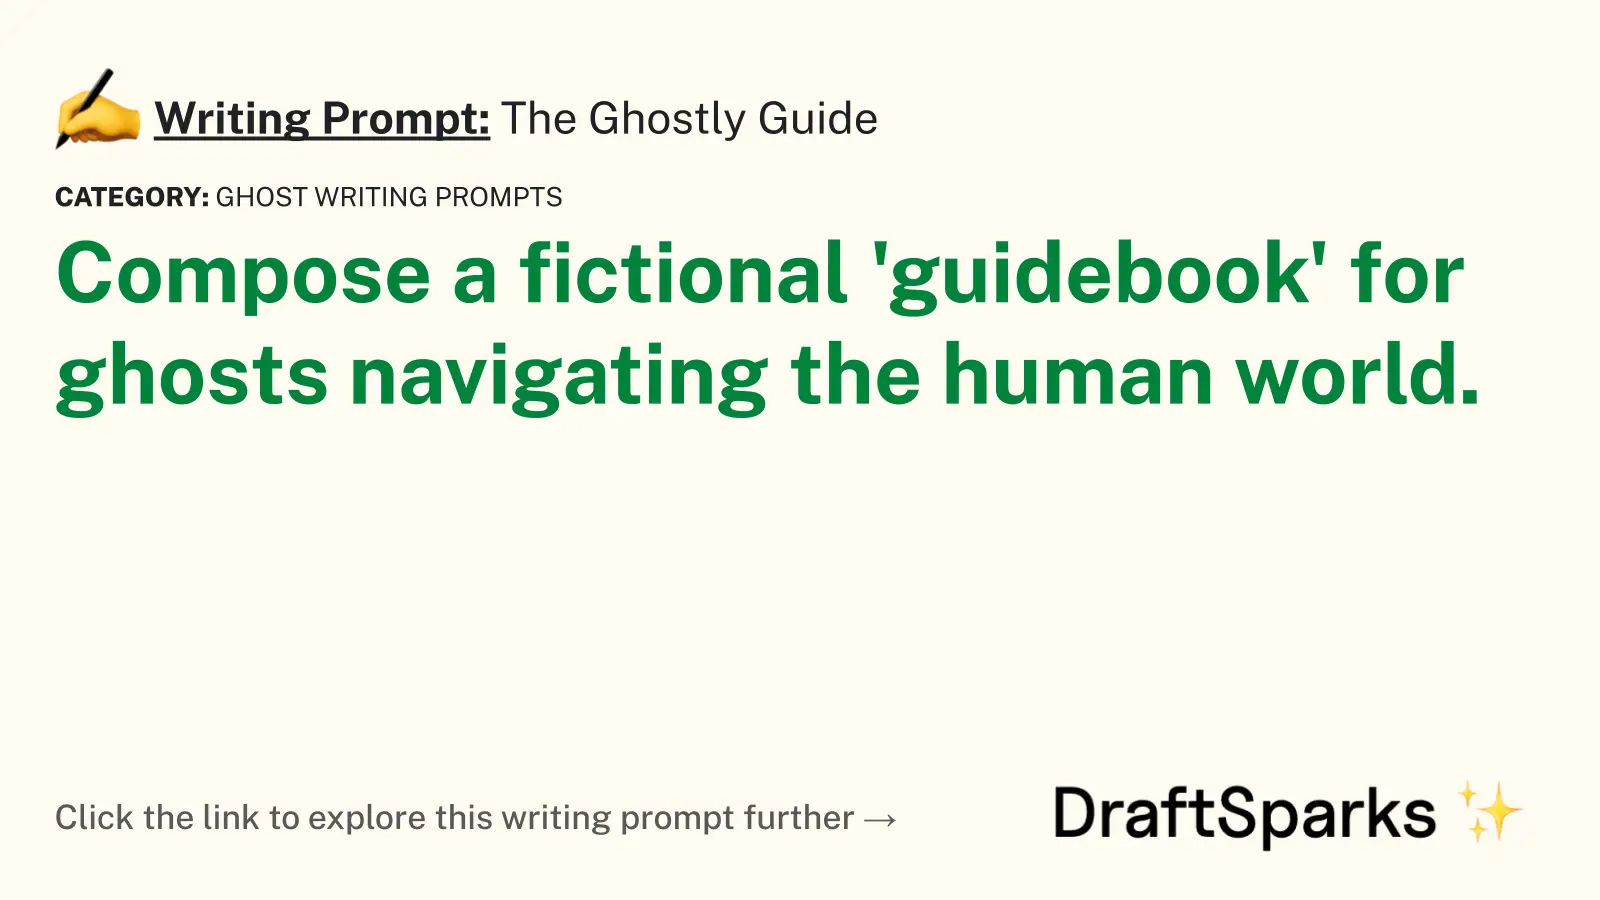 The Ghostly Guide